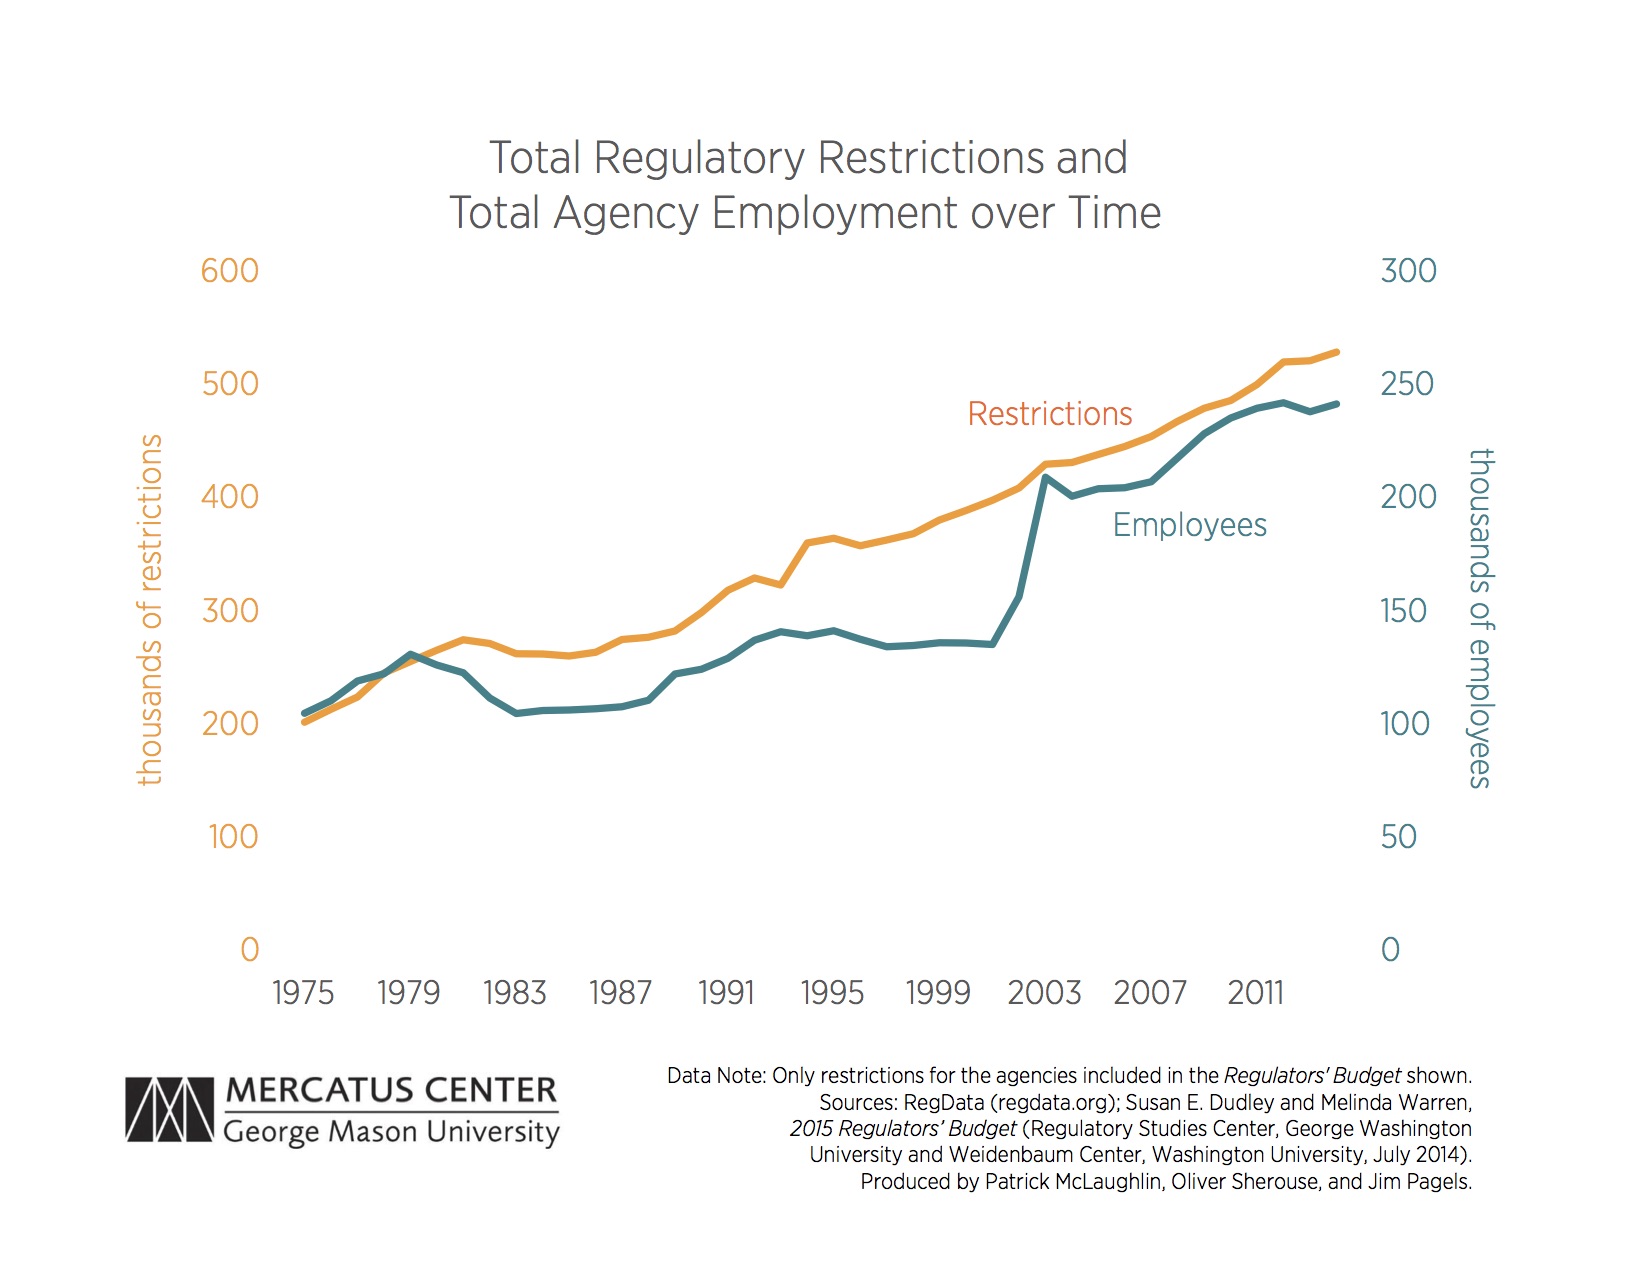 Total Regulatory Restrictions and Total Agency Employment over Time